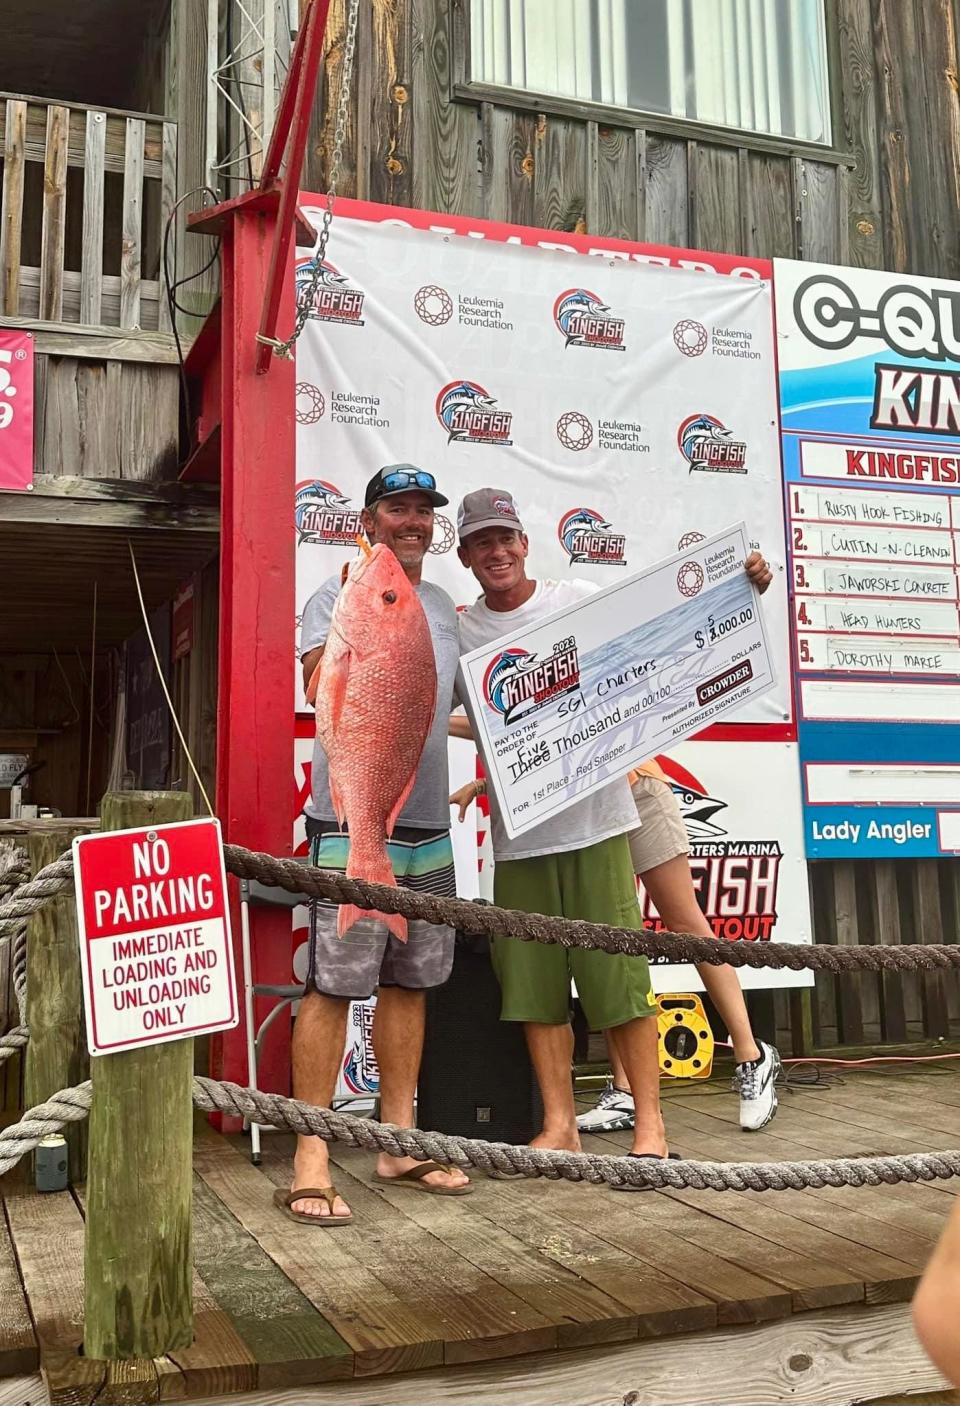 Captain Lee Chapin and 1st mate Griffen, hold up the winning Red Snapper from last weekend’s Kingfish Shootout out of Carrabelle